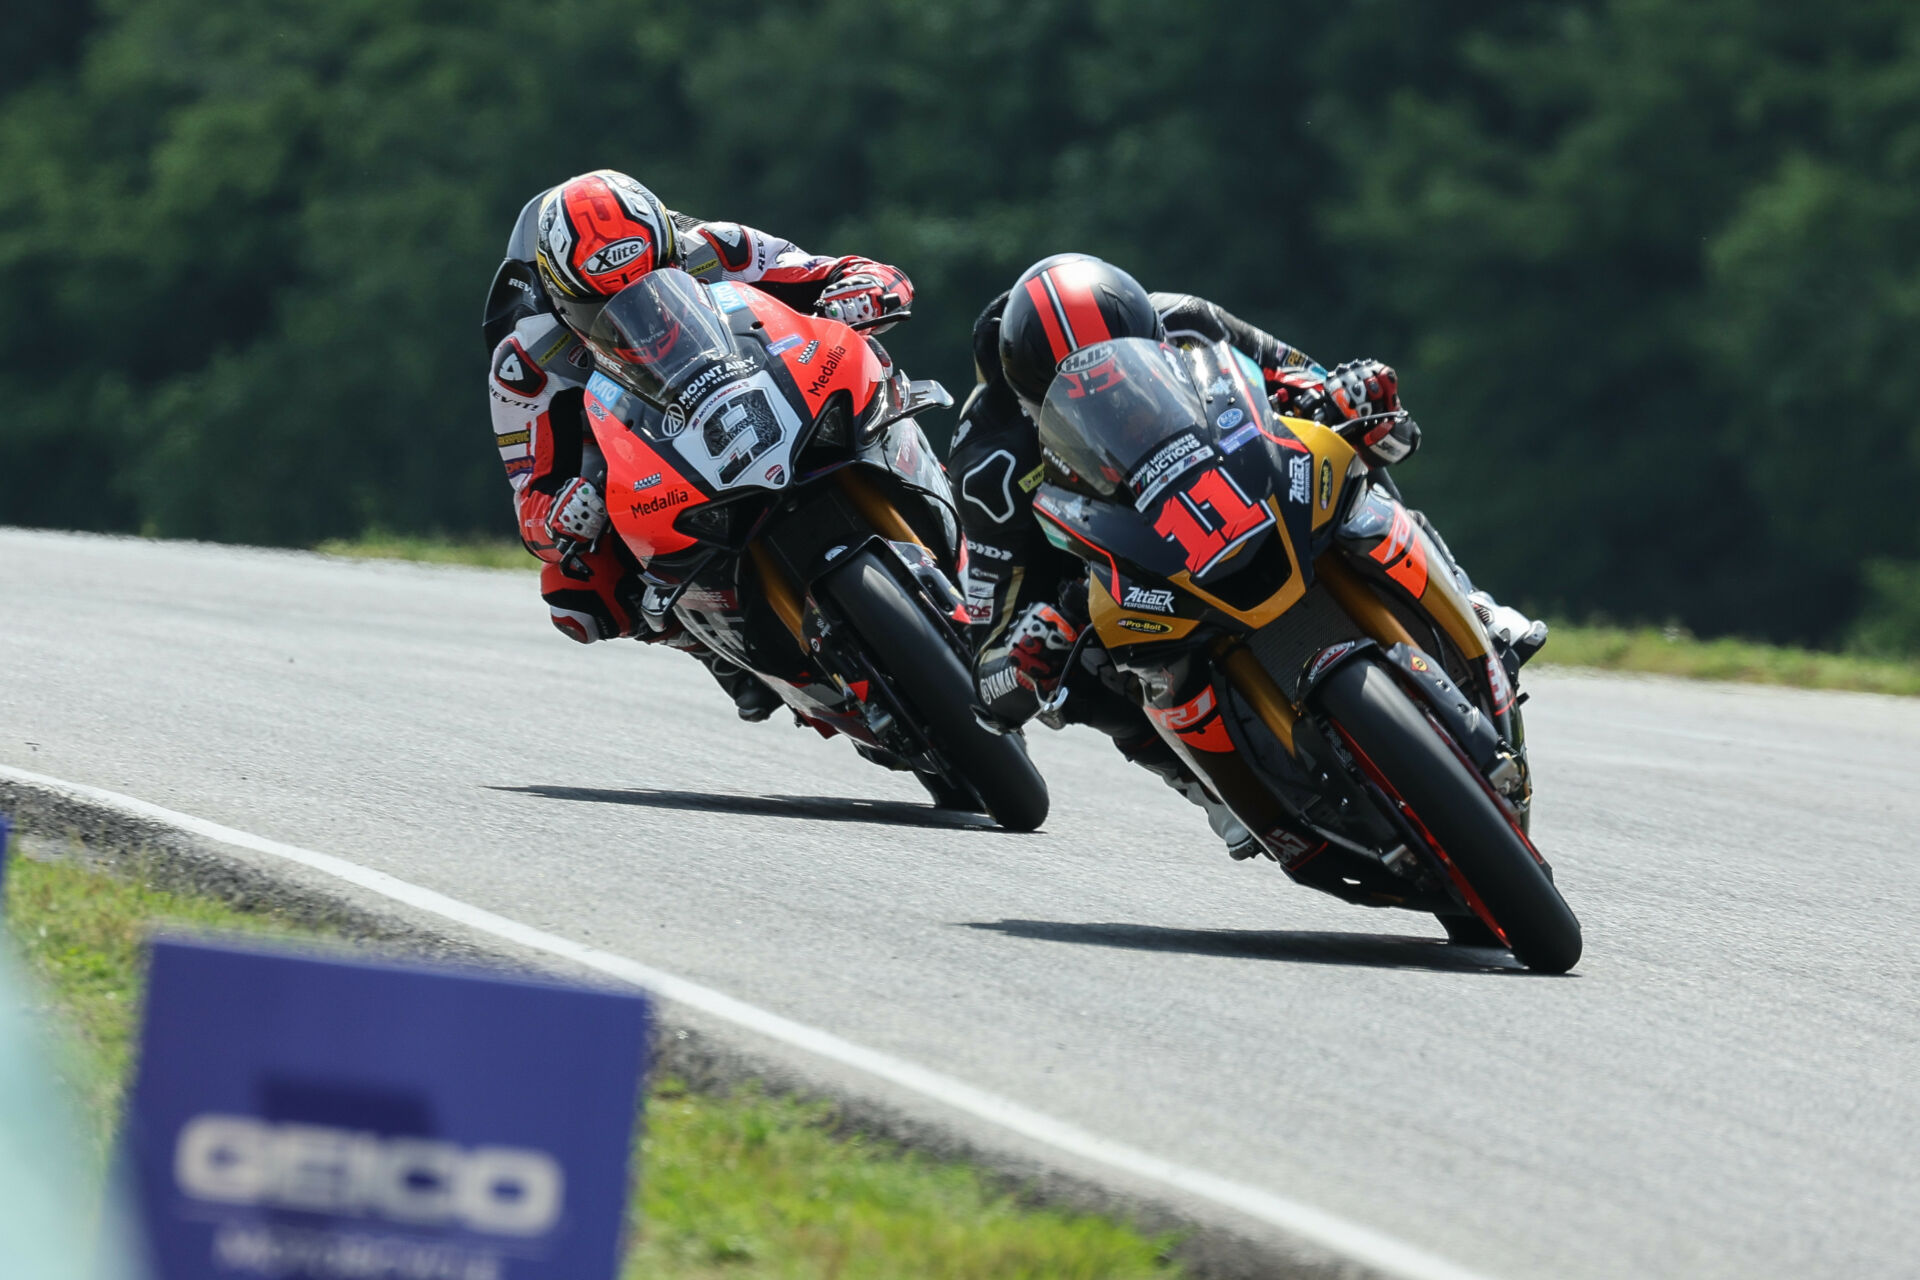 Mathew Scholtz (11) and Danilo Petrucci (9) on the kinked front straightaway at VIRginia International Raceway. Photo by Brian J. Nelson.